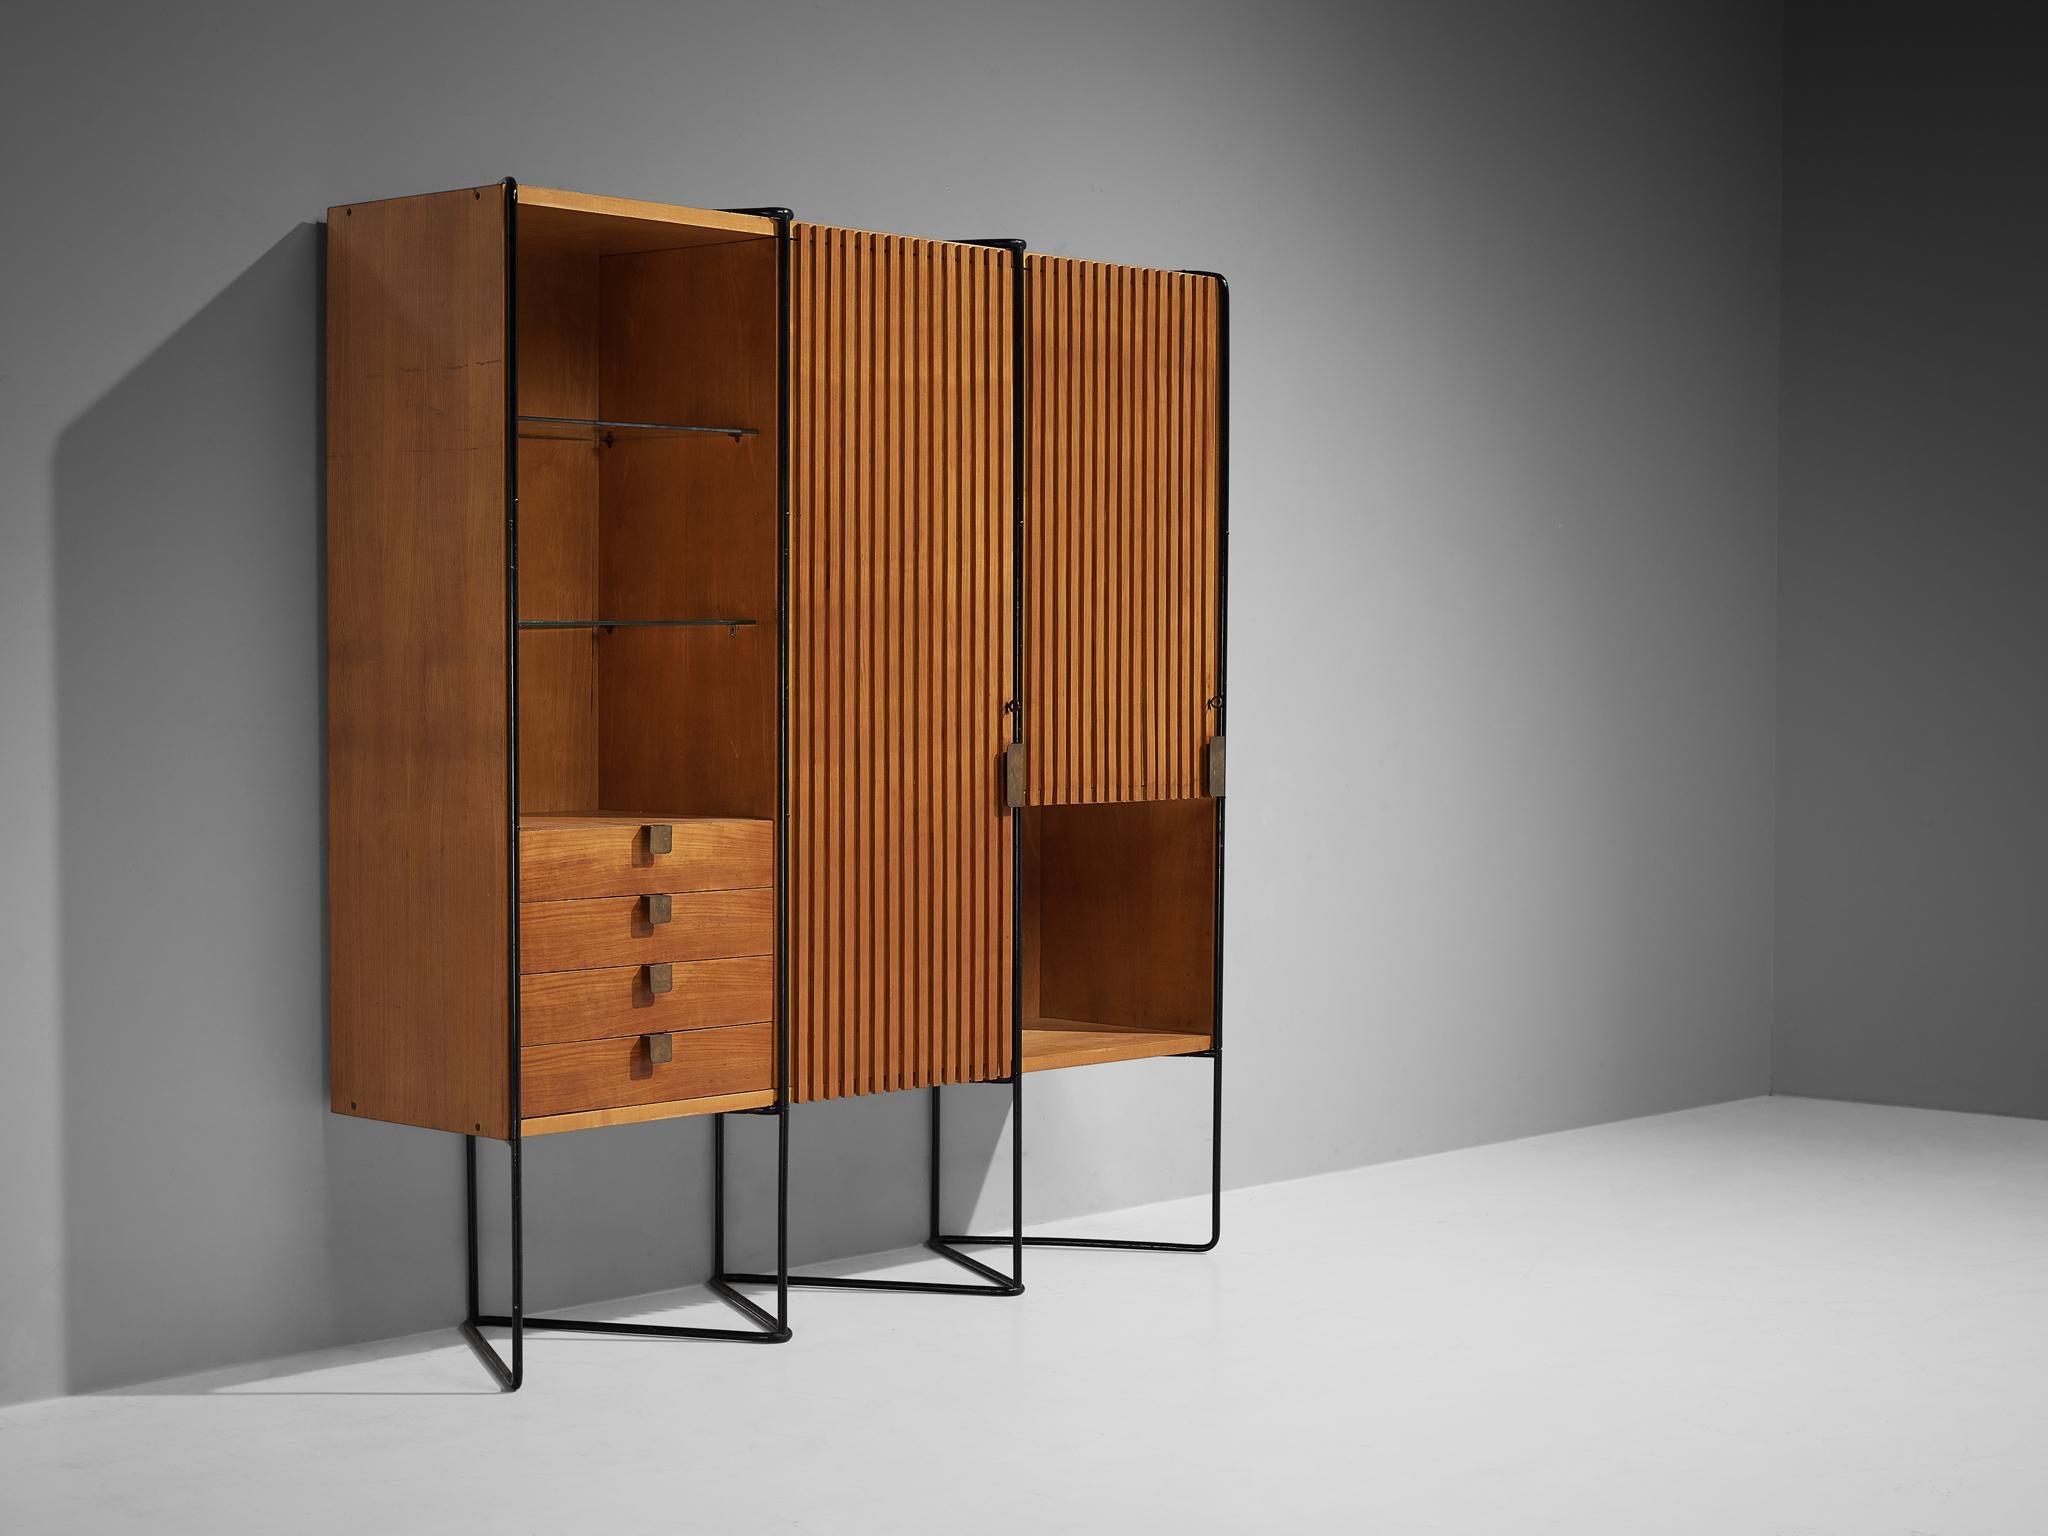 Taichiro Nakay (Nakai), sideboard, coated steel, cherry, brass, glass, circa 1955 

Taichiro Nakay is an incredibly talented Japanese designer who is mostly known for his participation at the Selettiva del Mobili competition in Cantù. During the